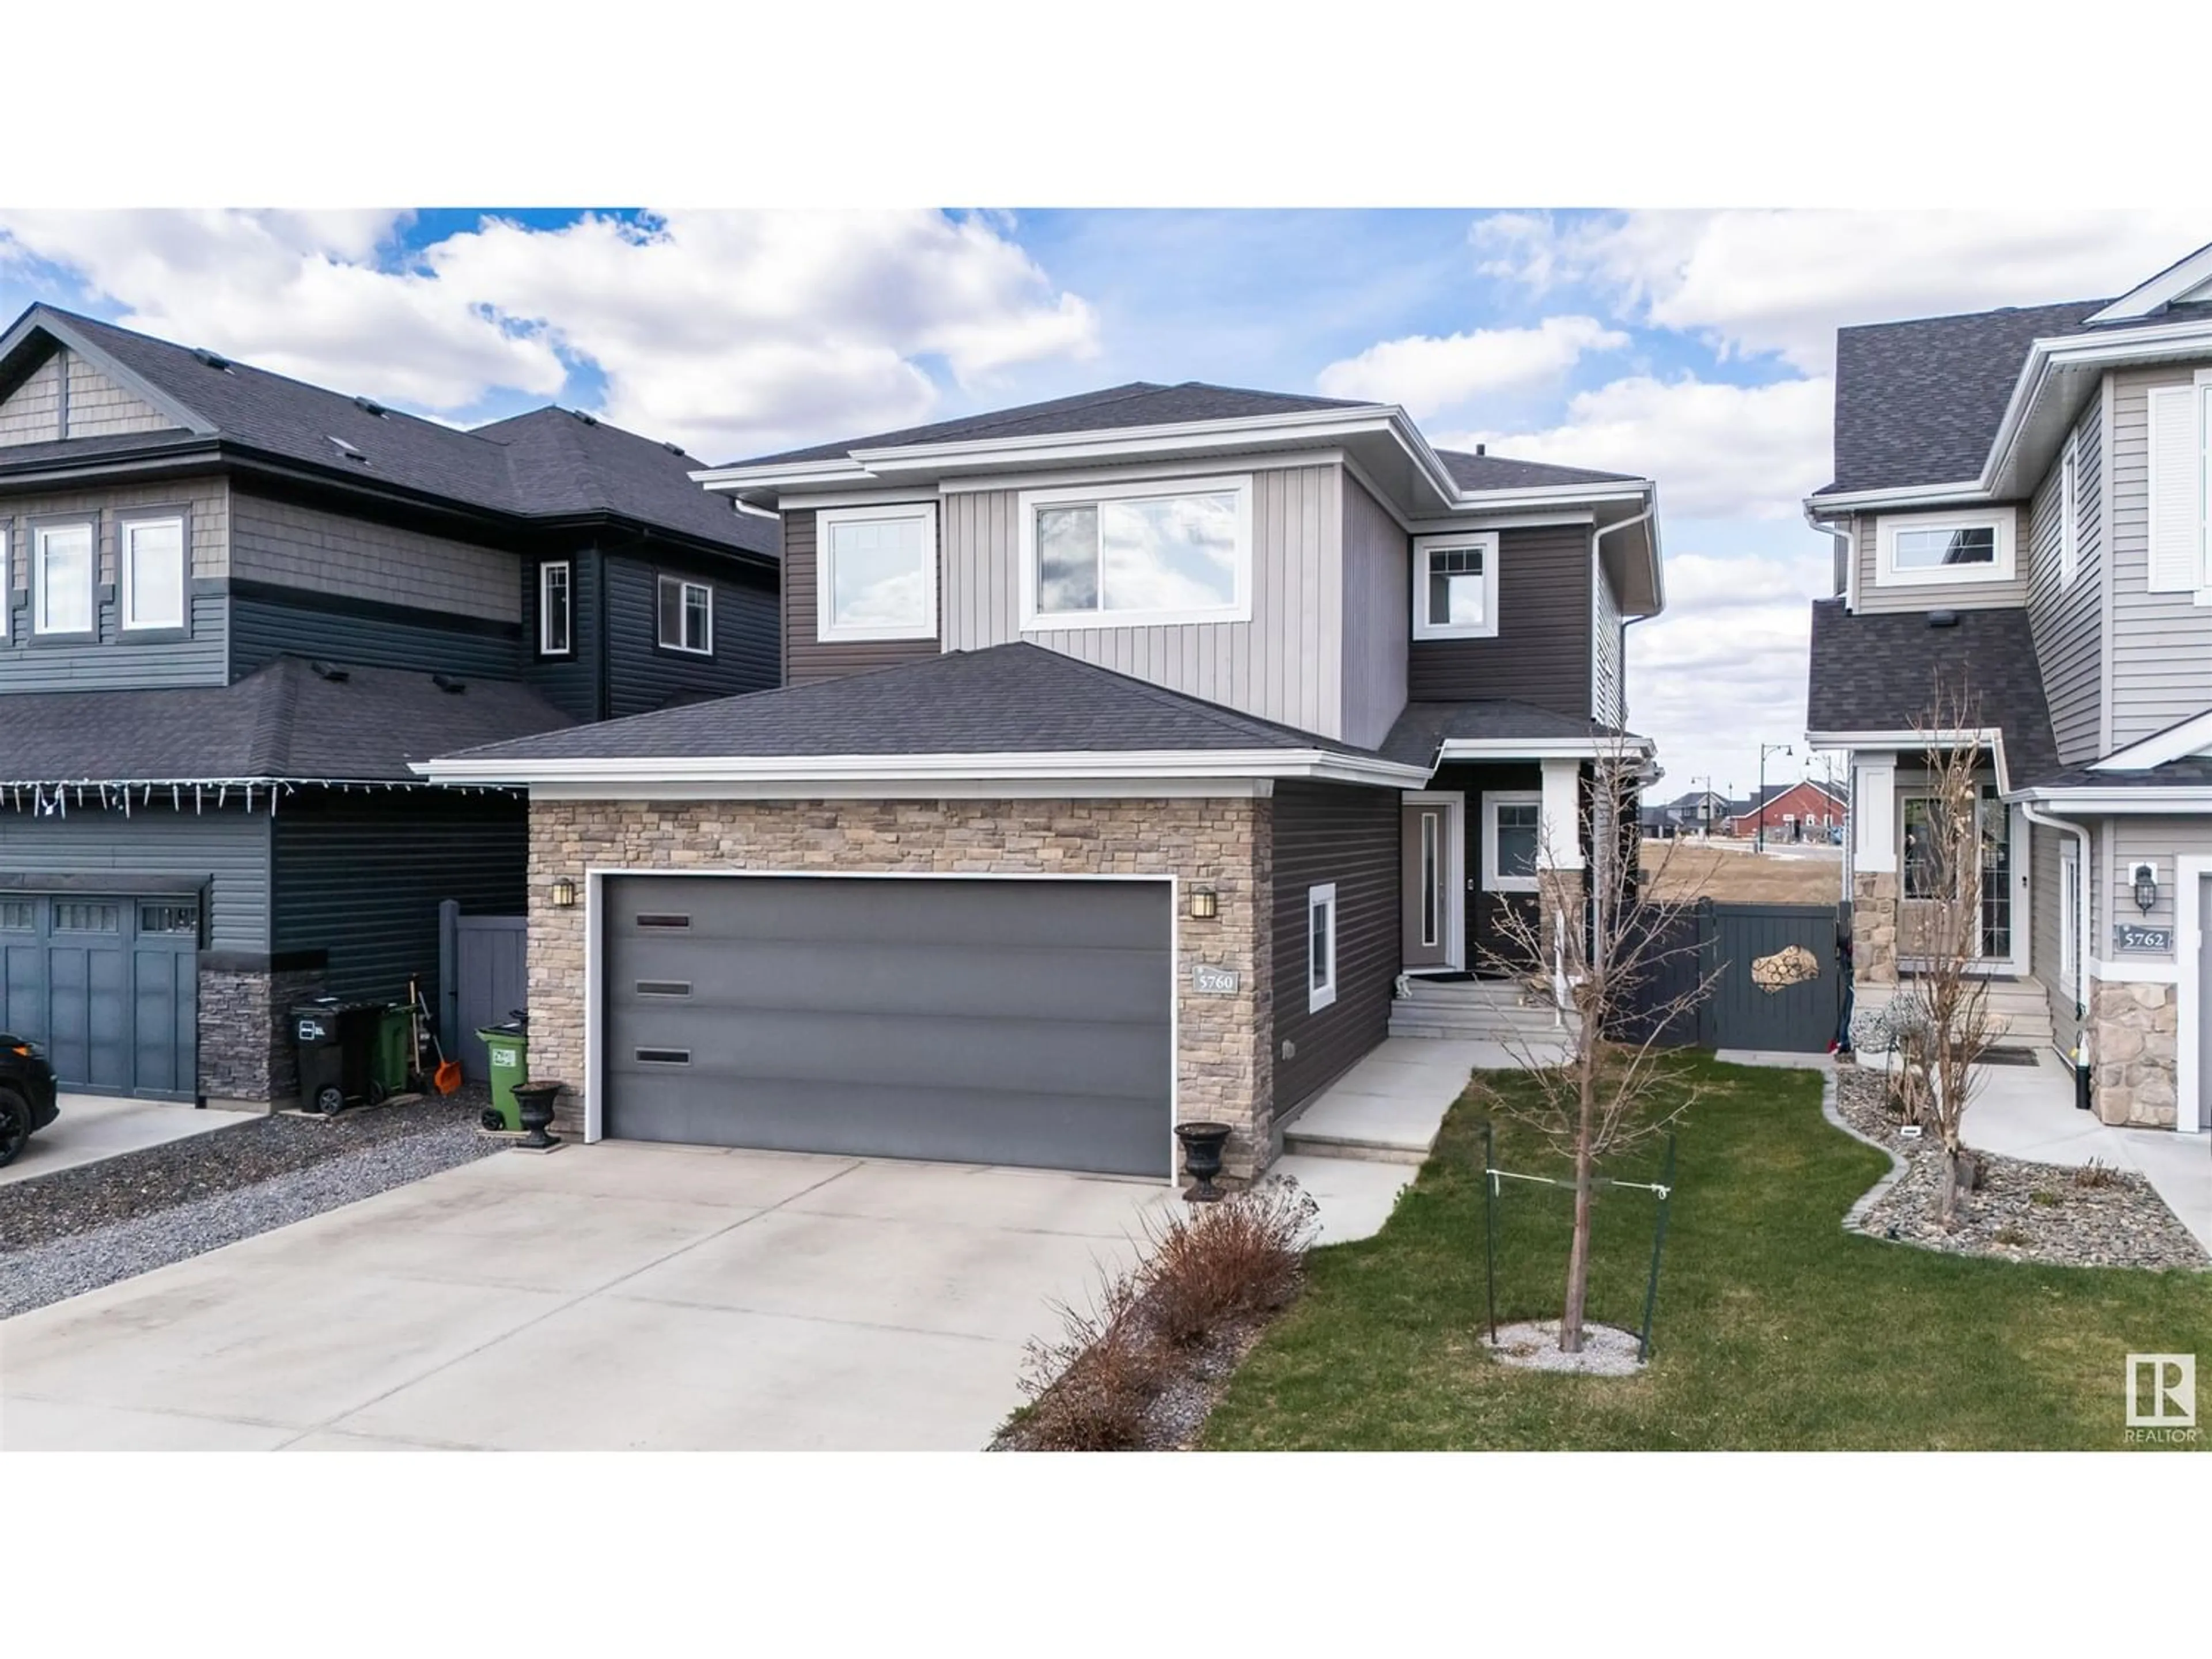 Frontside or backside of a home for 5760 GREENOUGH LD NW, Edmonton Alberta T5T7J7